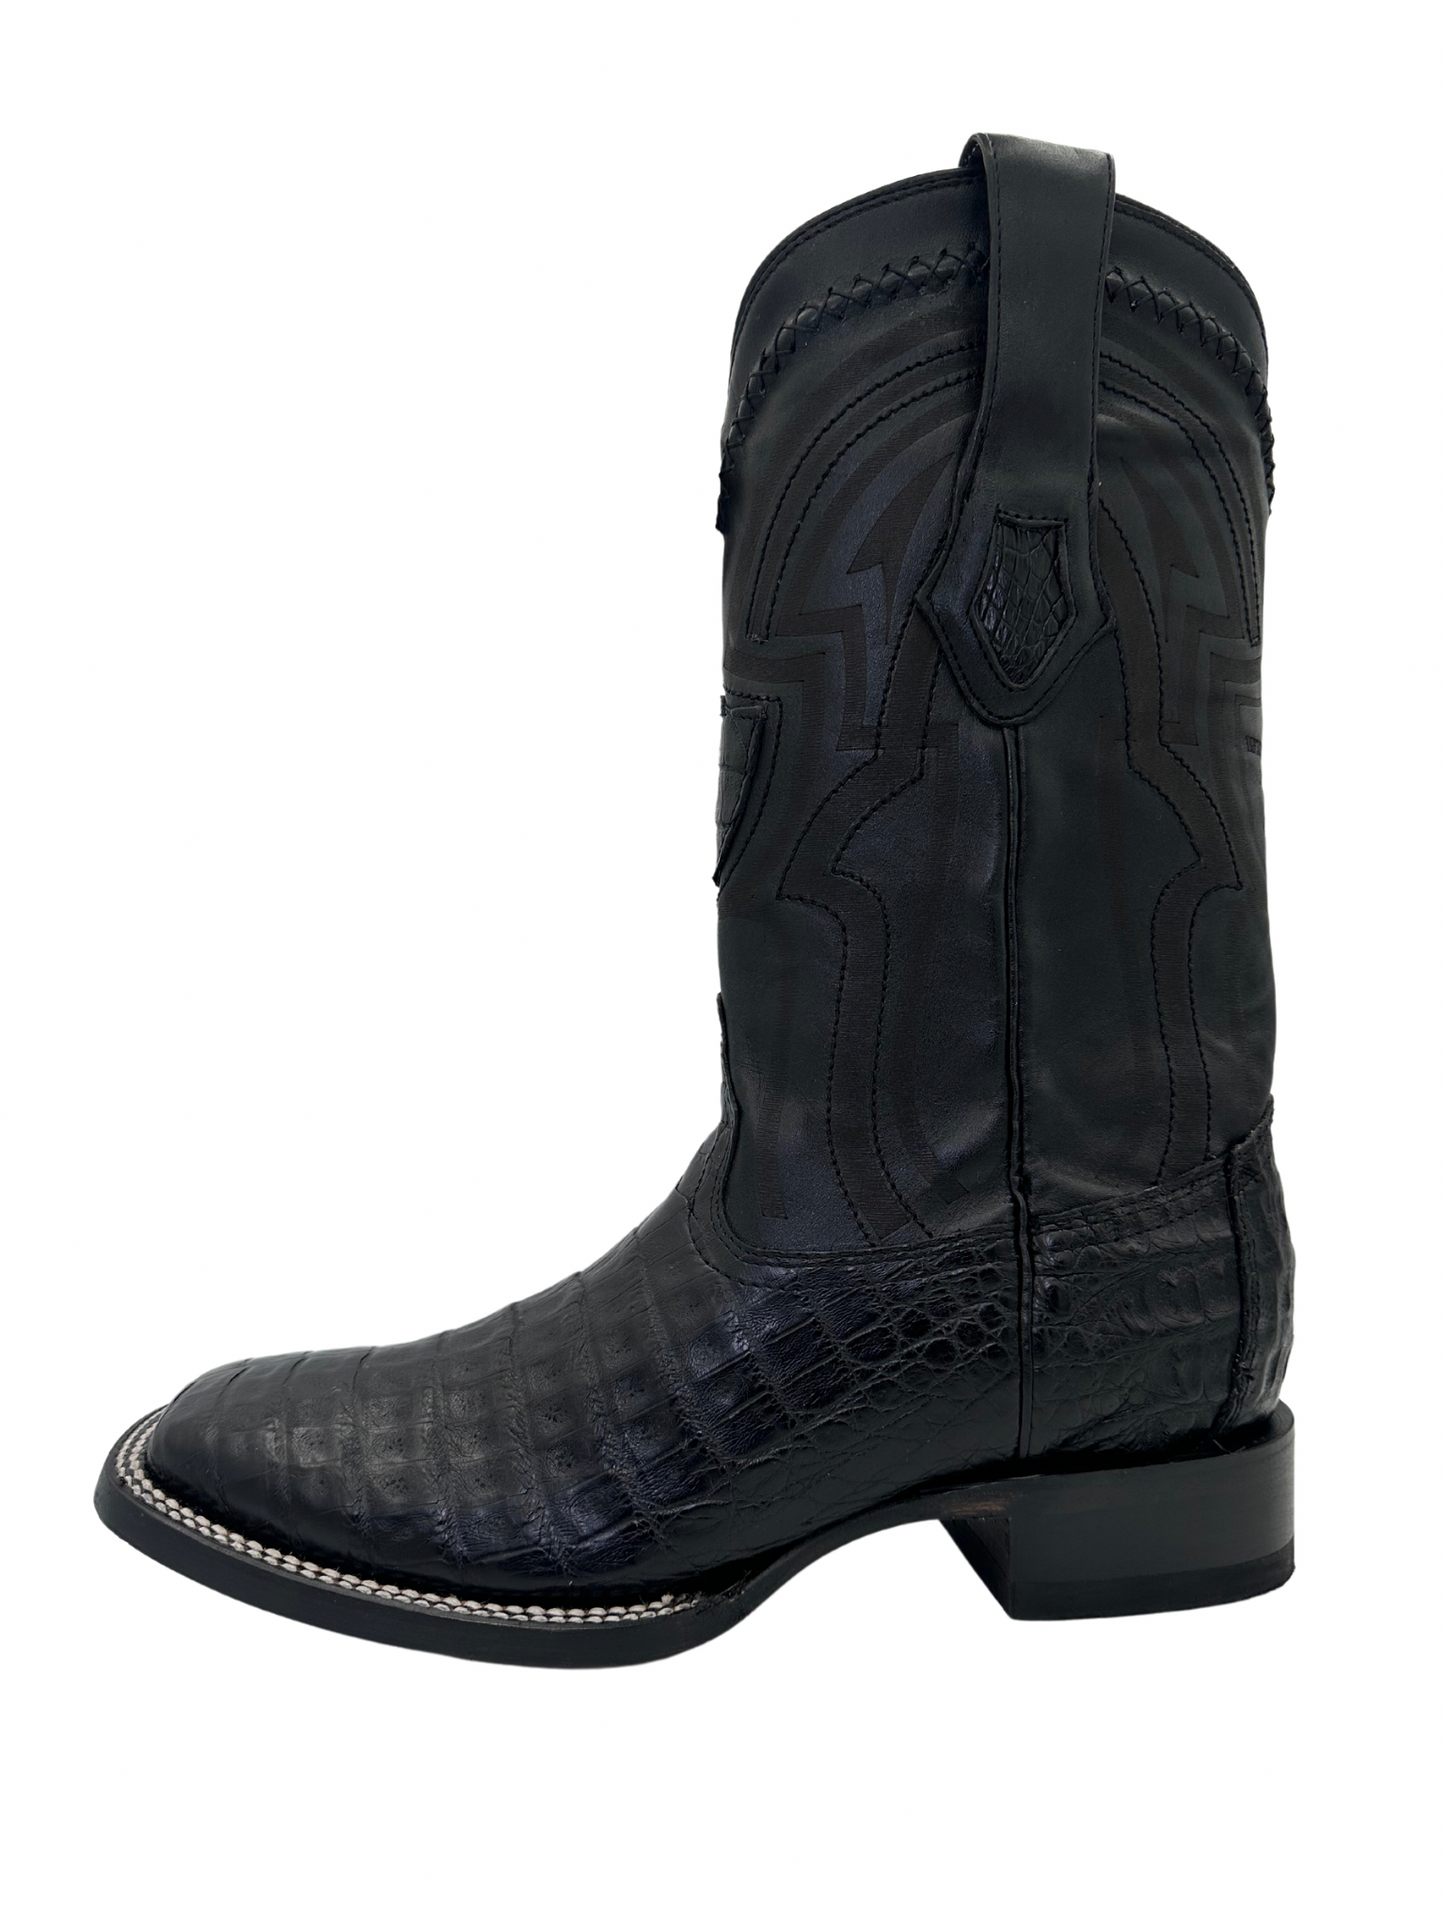 Wild West Men's Black Genuine Caiman Belly Wide Square Toe Boot